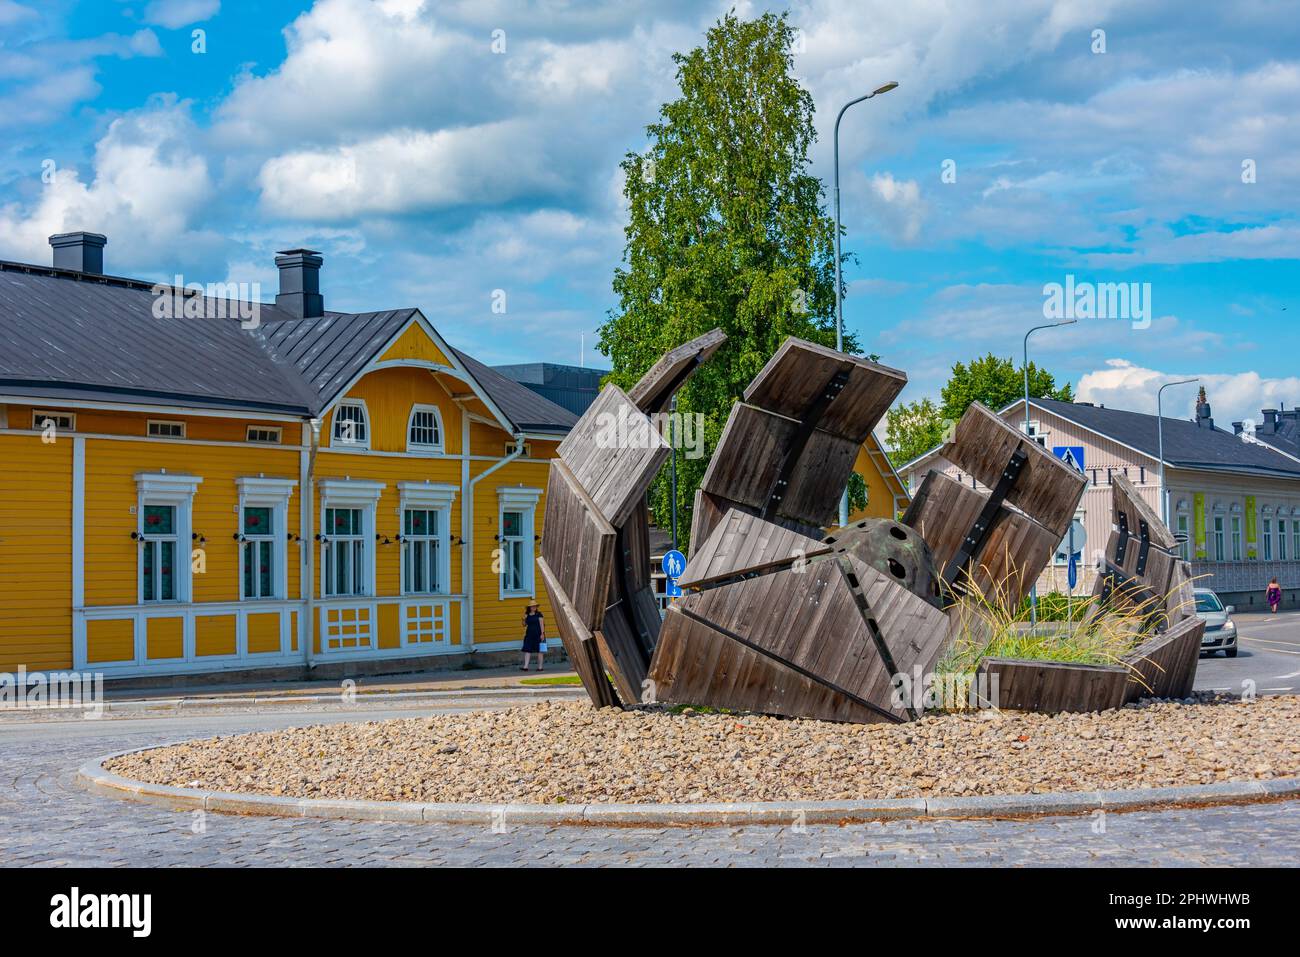 Colorful timber houses in Joensuu, Finland. Stock Photo